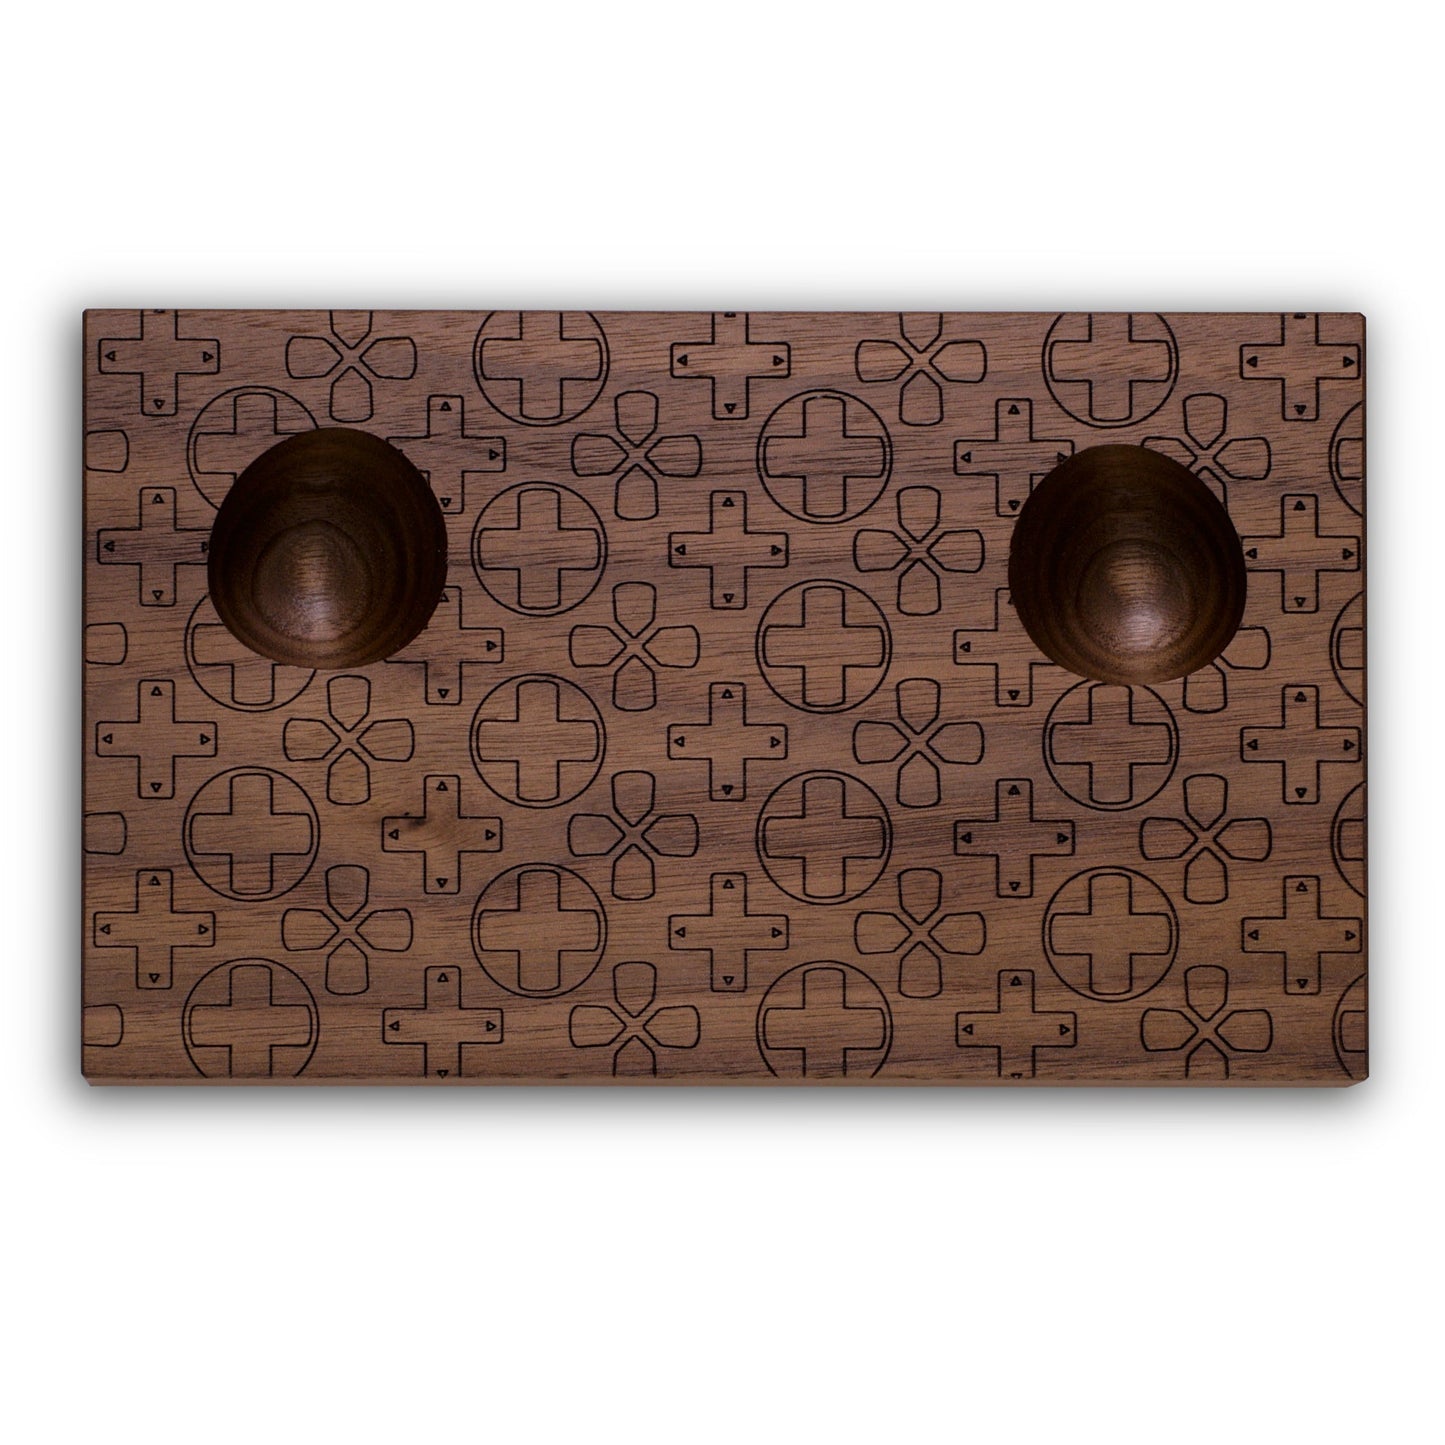 Wooden stand with d-pad design in walnut for Playstation 5 dualsense controller